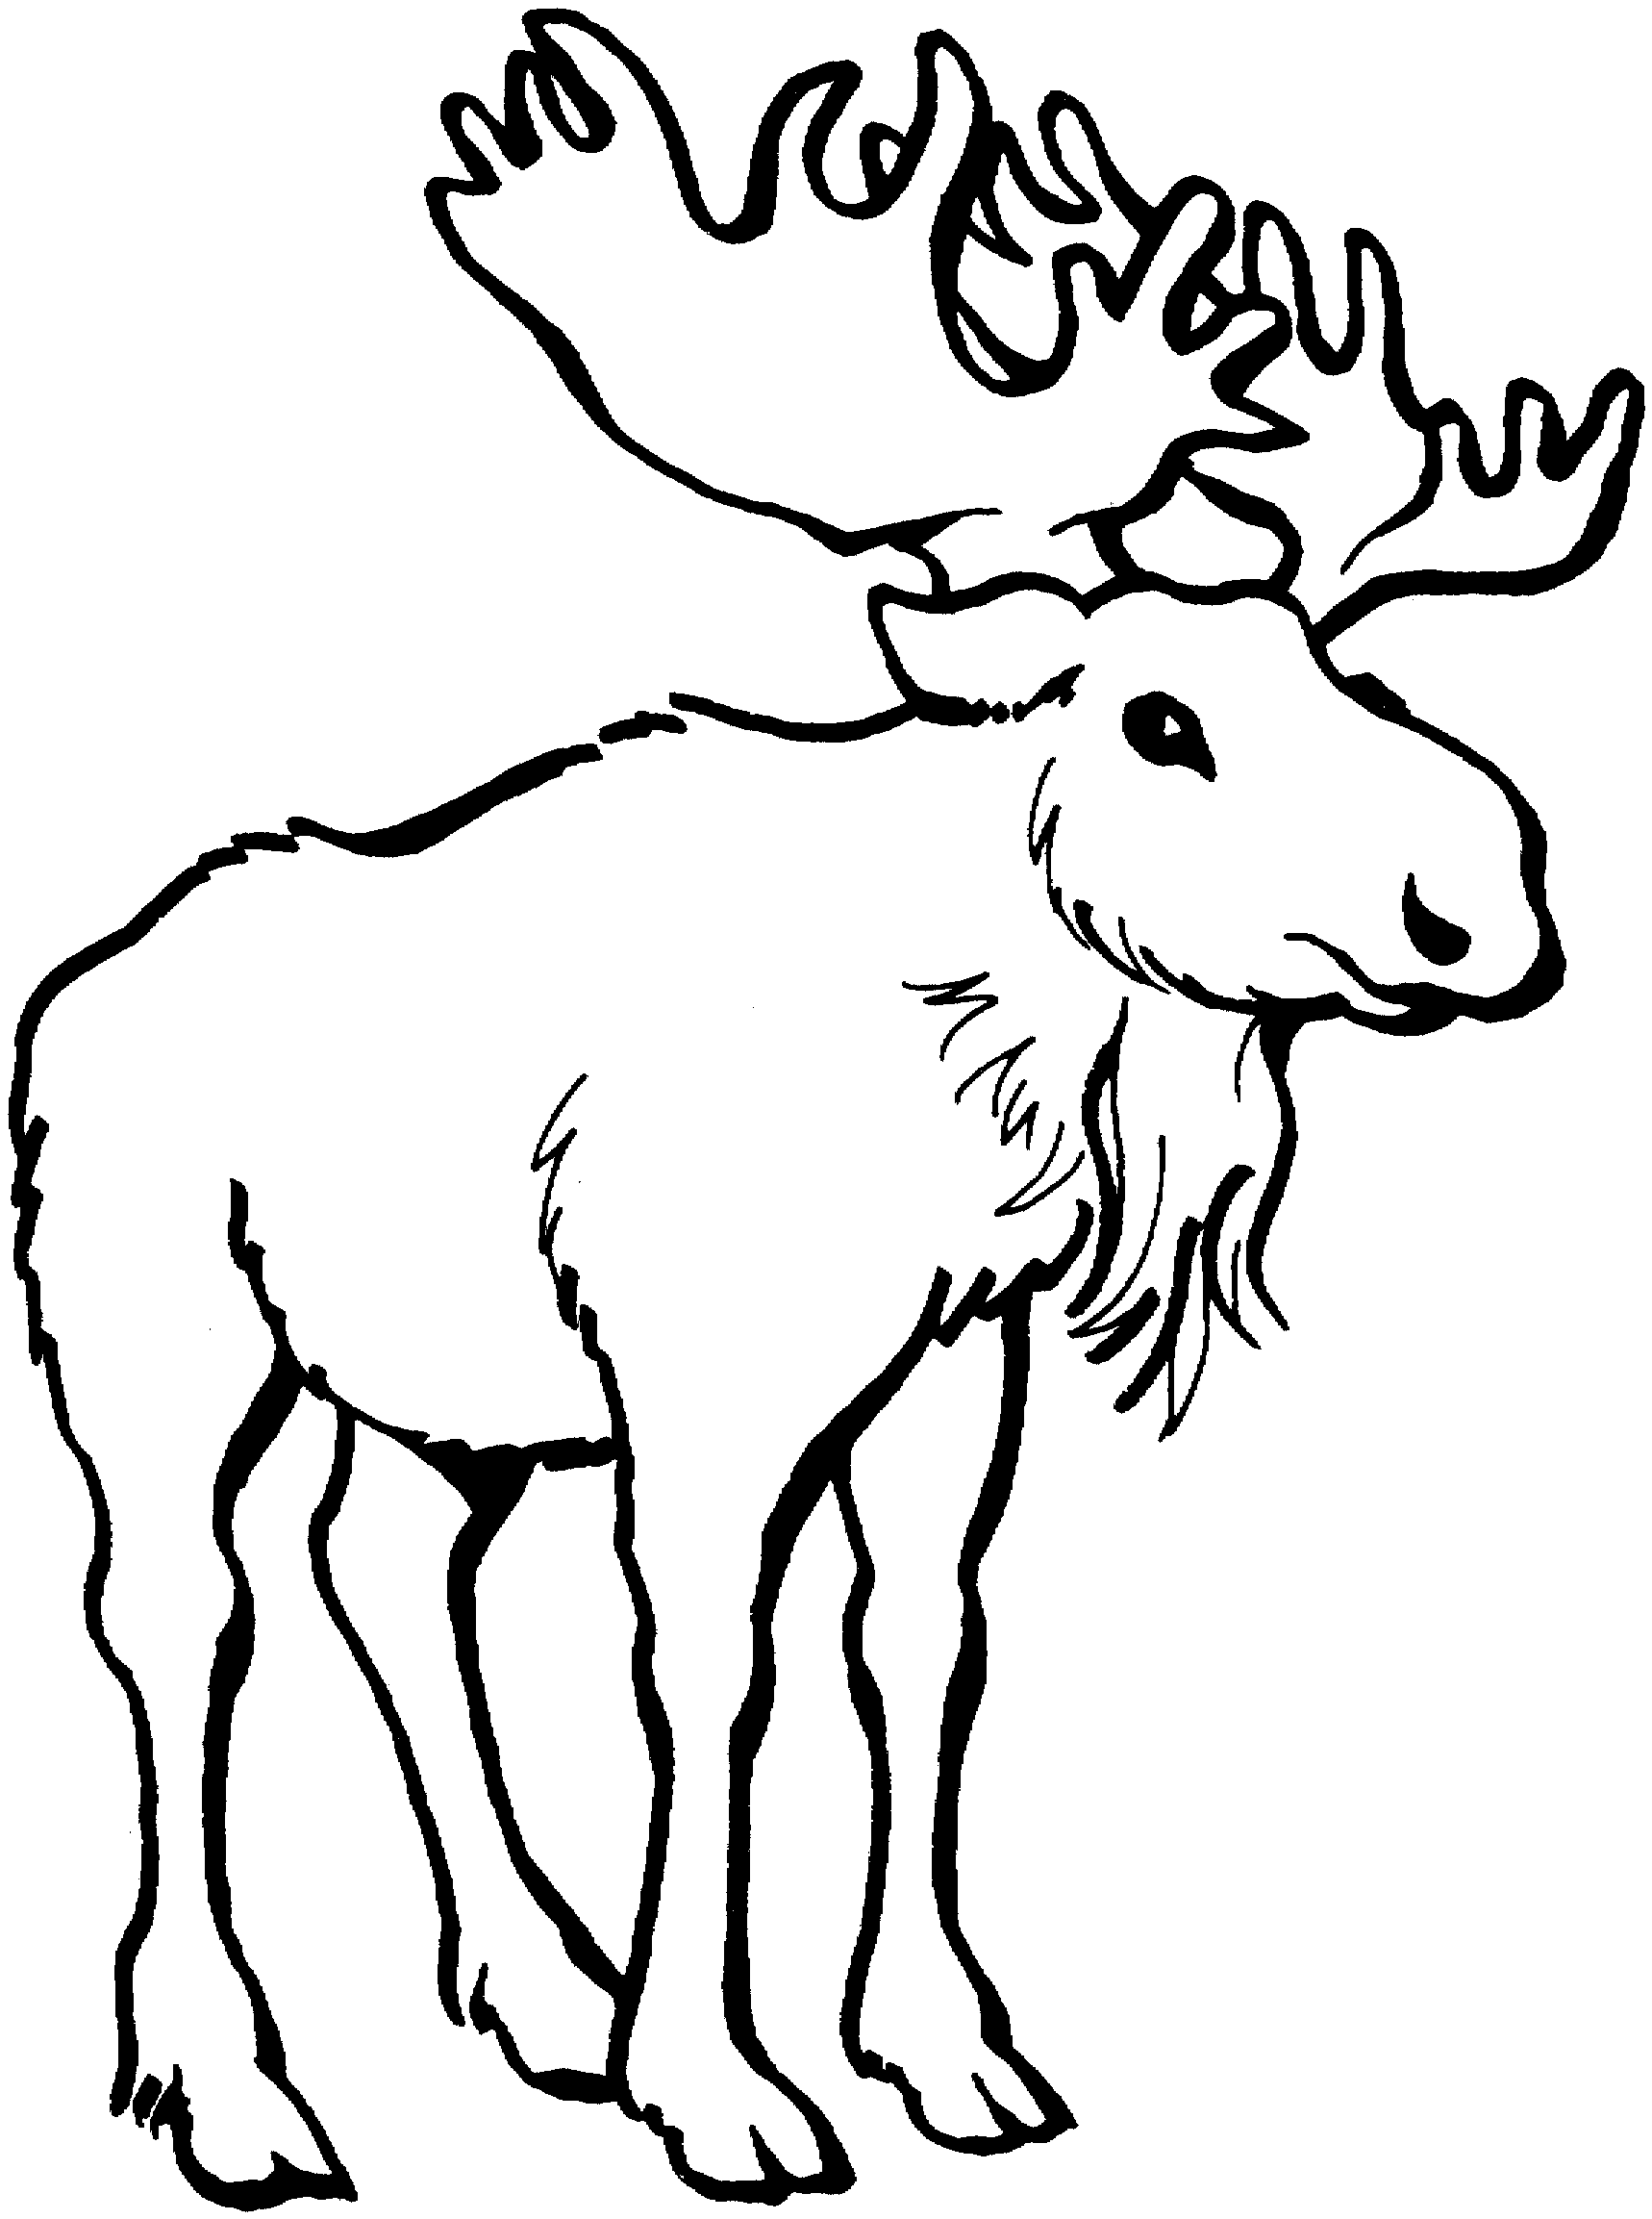 Moose clipart cartoon free images 4